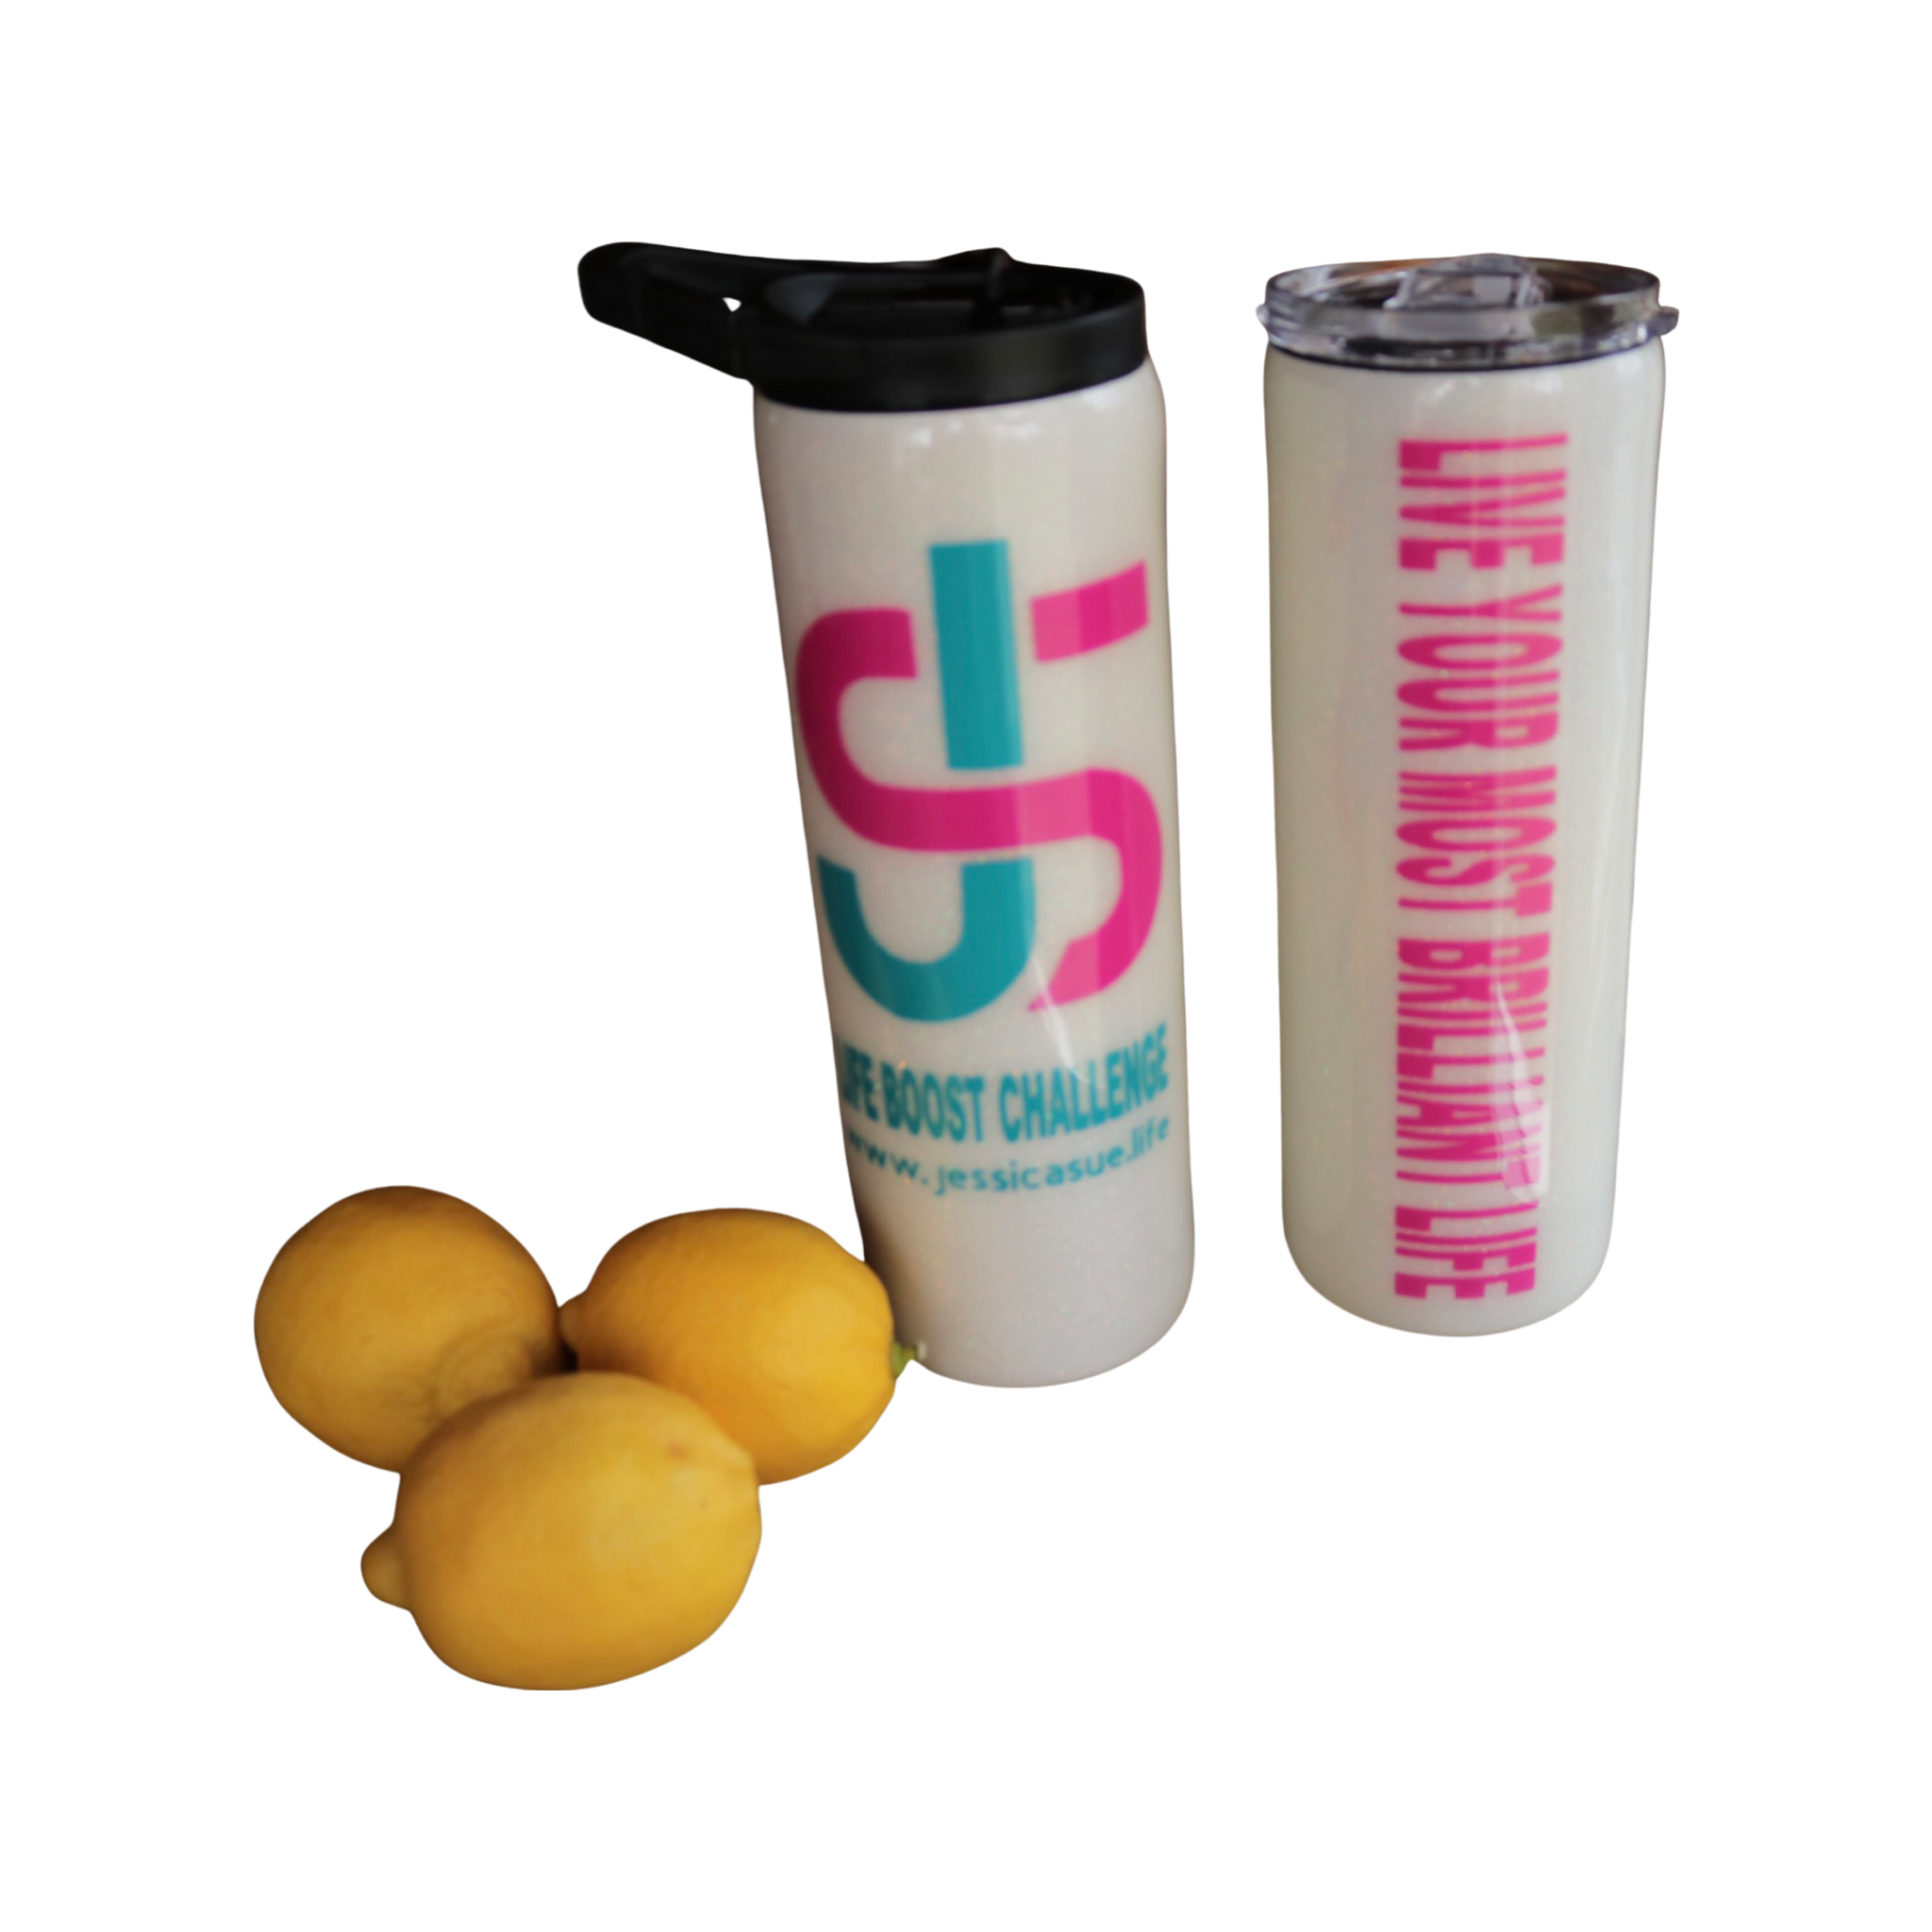 Workout Affirmations Tumbler, Workout Tumbler, Fitness Gifts for